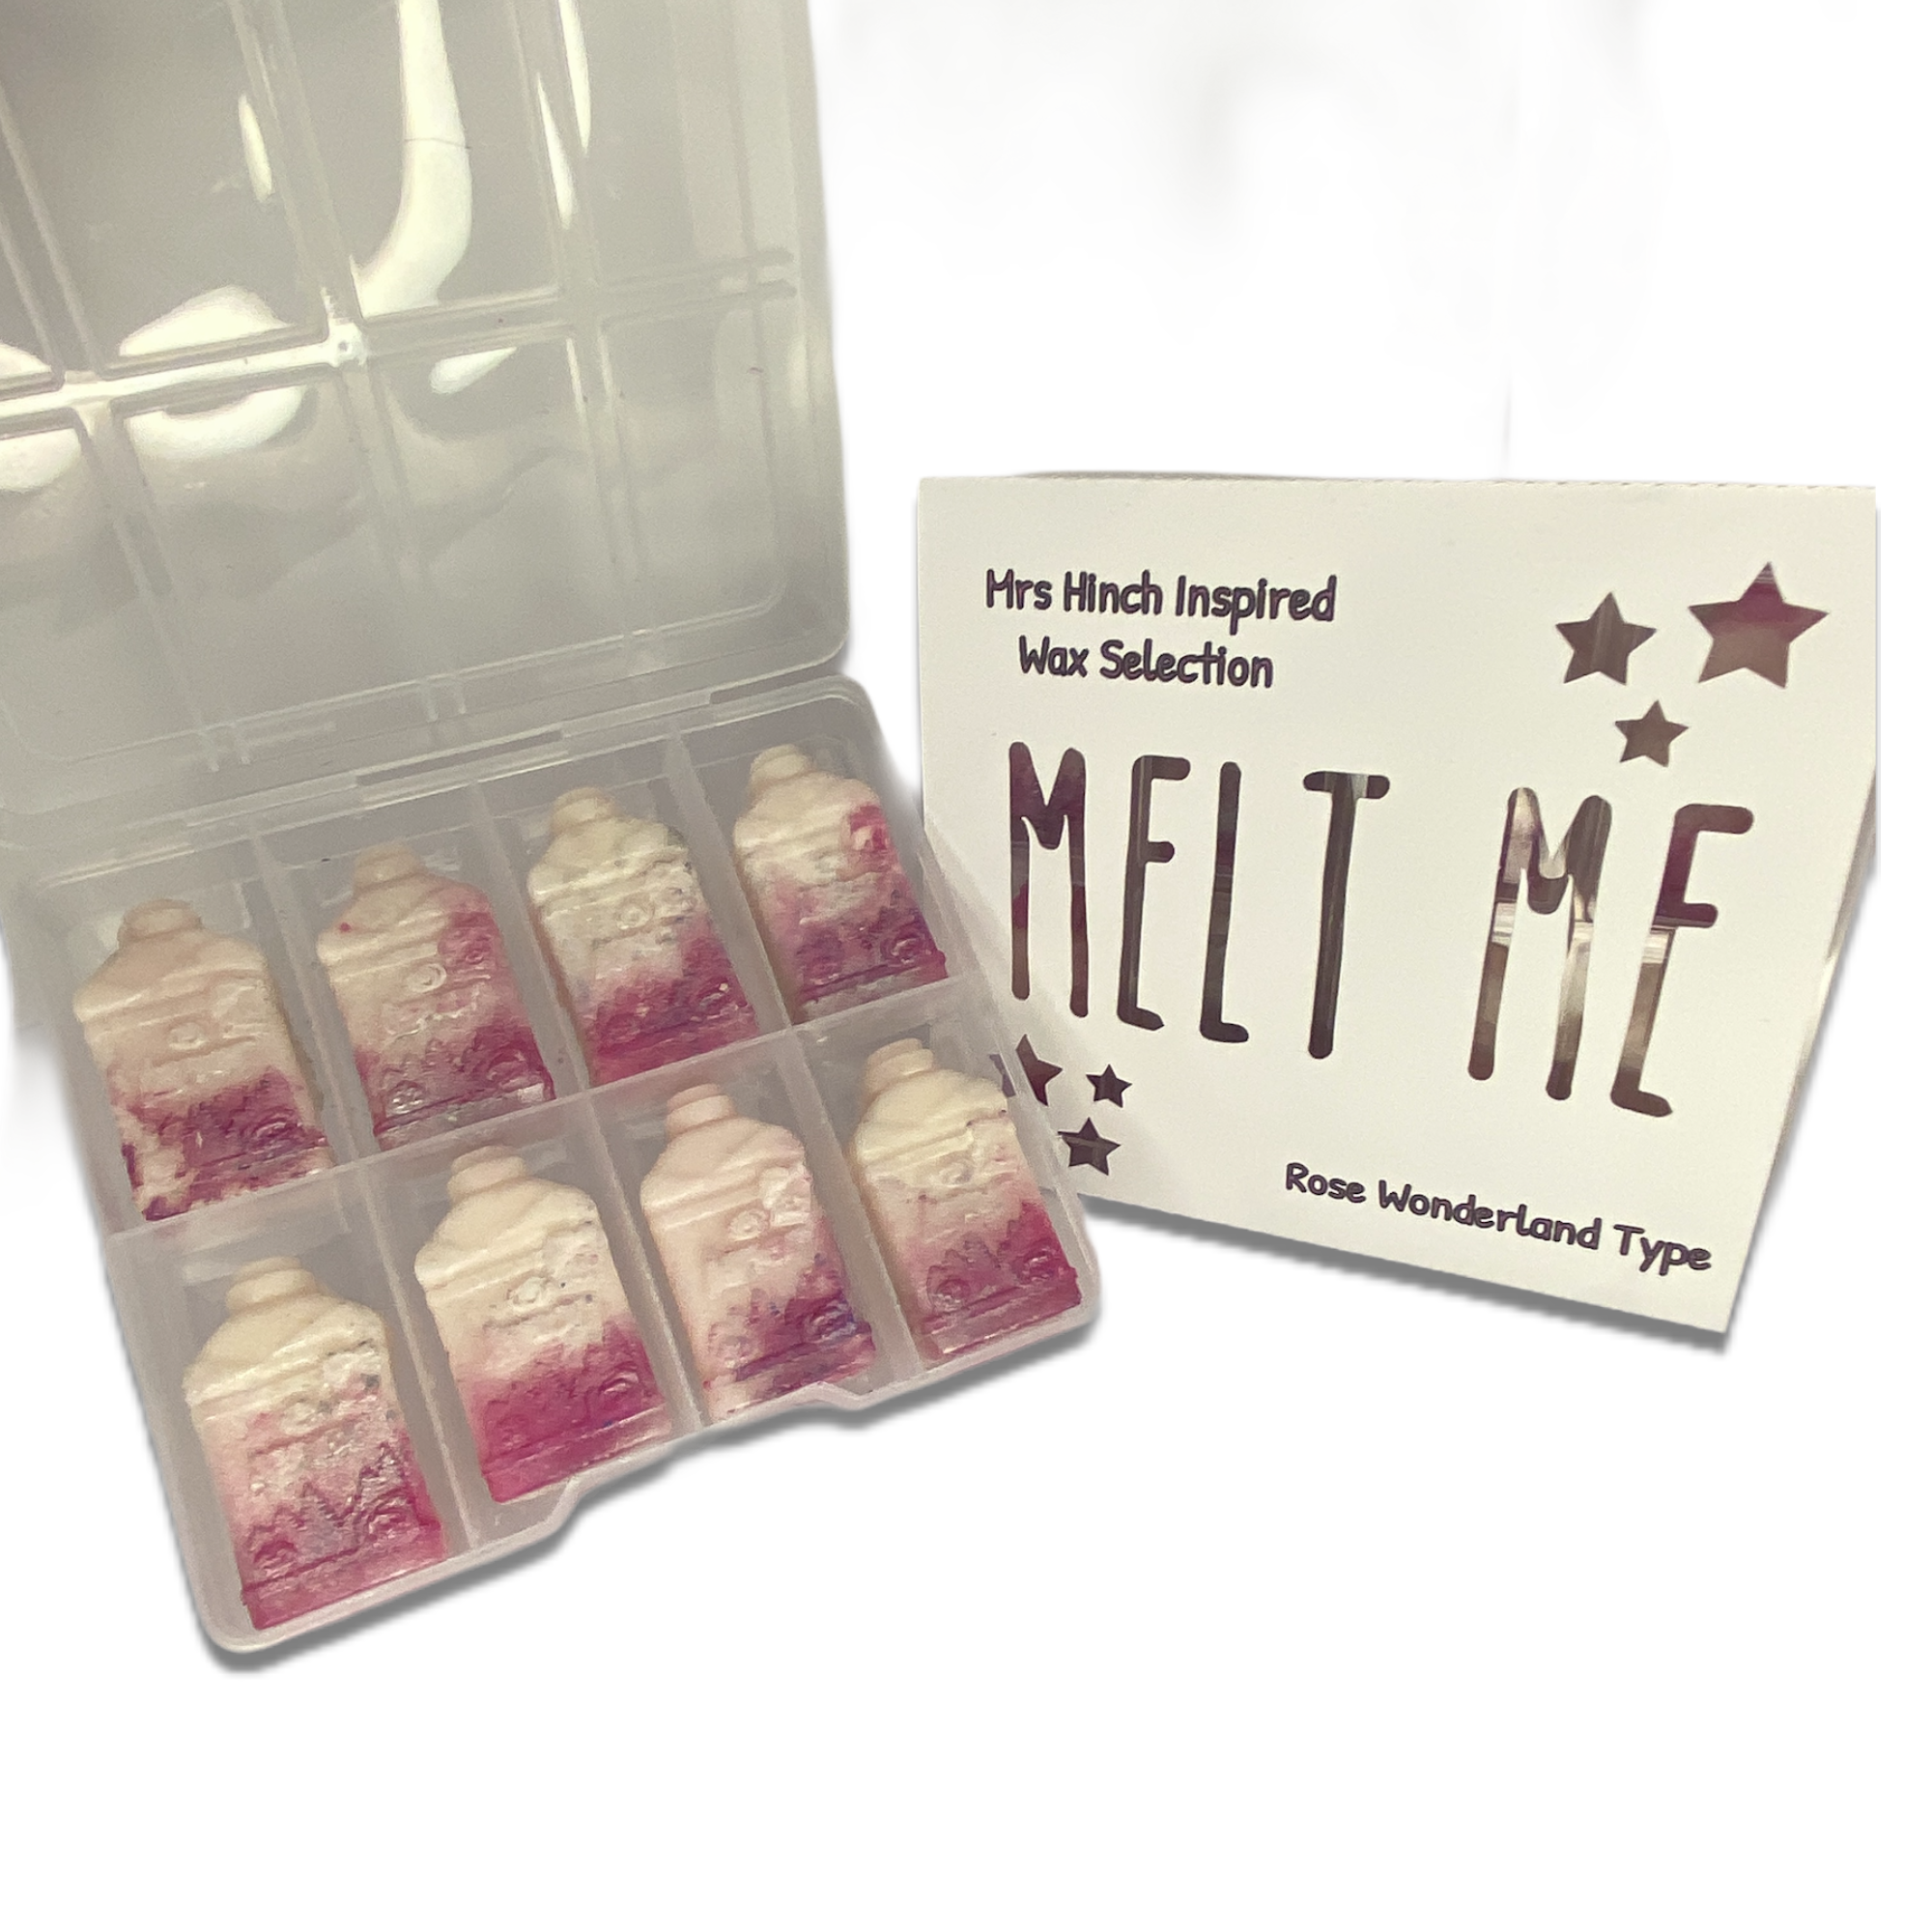 Laundry & Mrs Hinch Inspired Clean Scent Melts Unstoppables Wax Melt Box